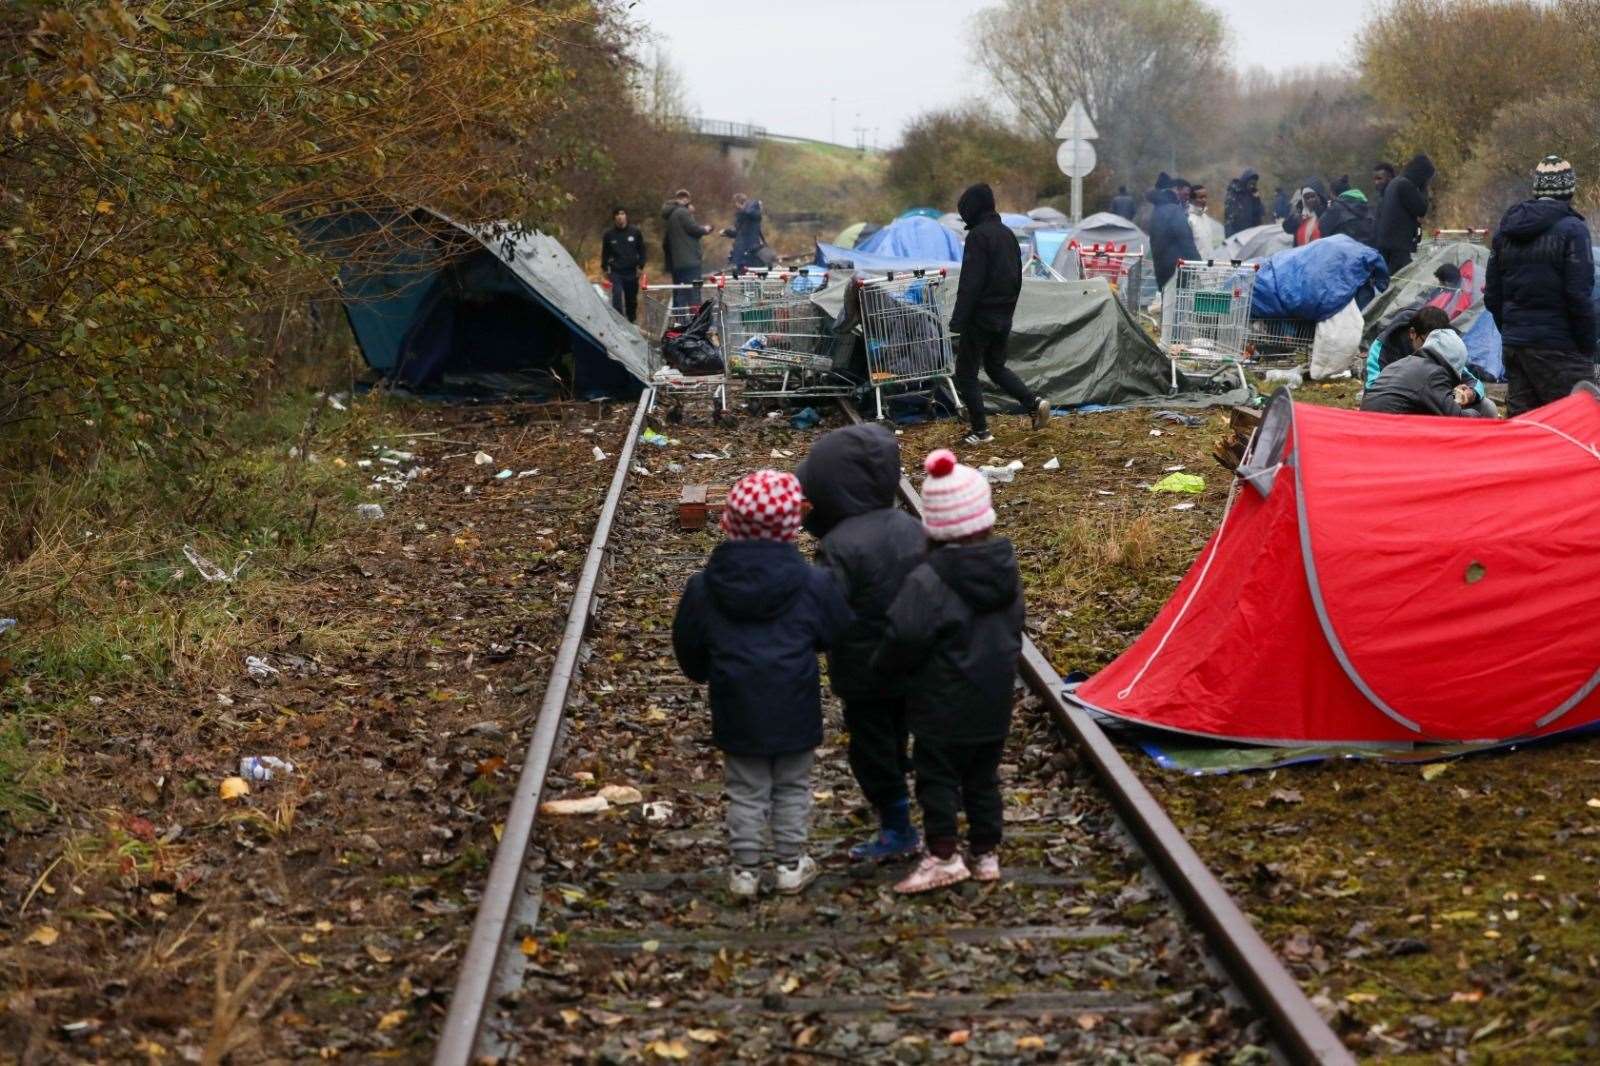 Asylum seekers at a camp in France on Thursday Picture: UKNIP